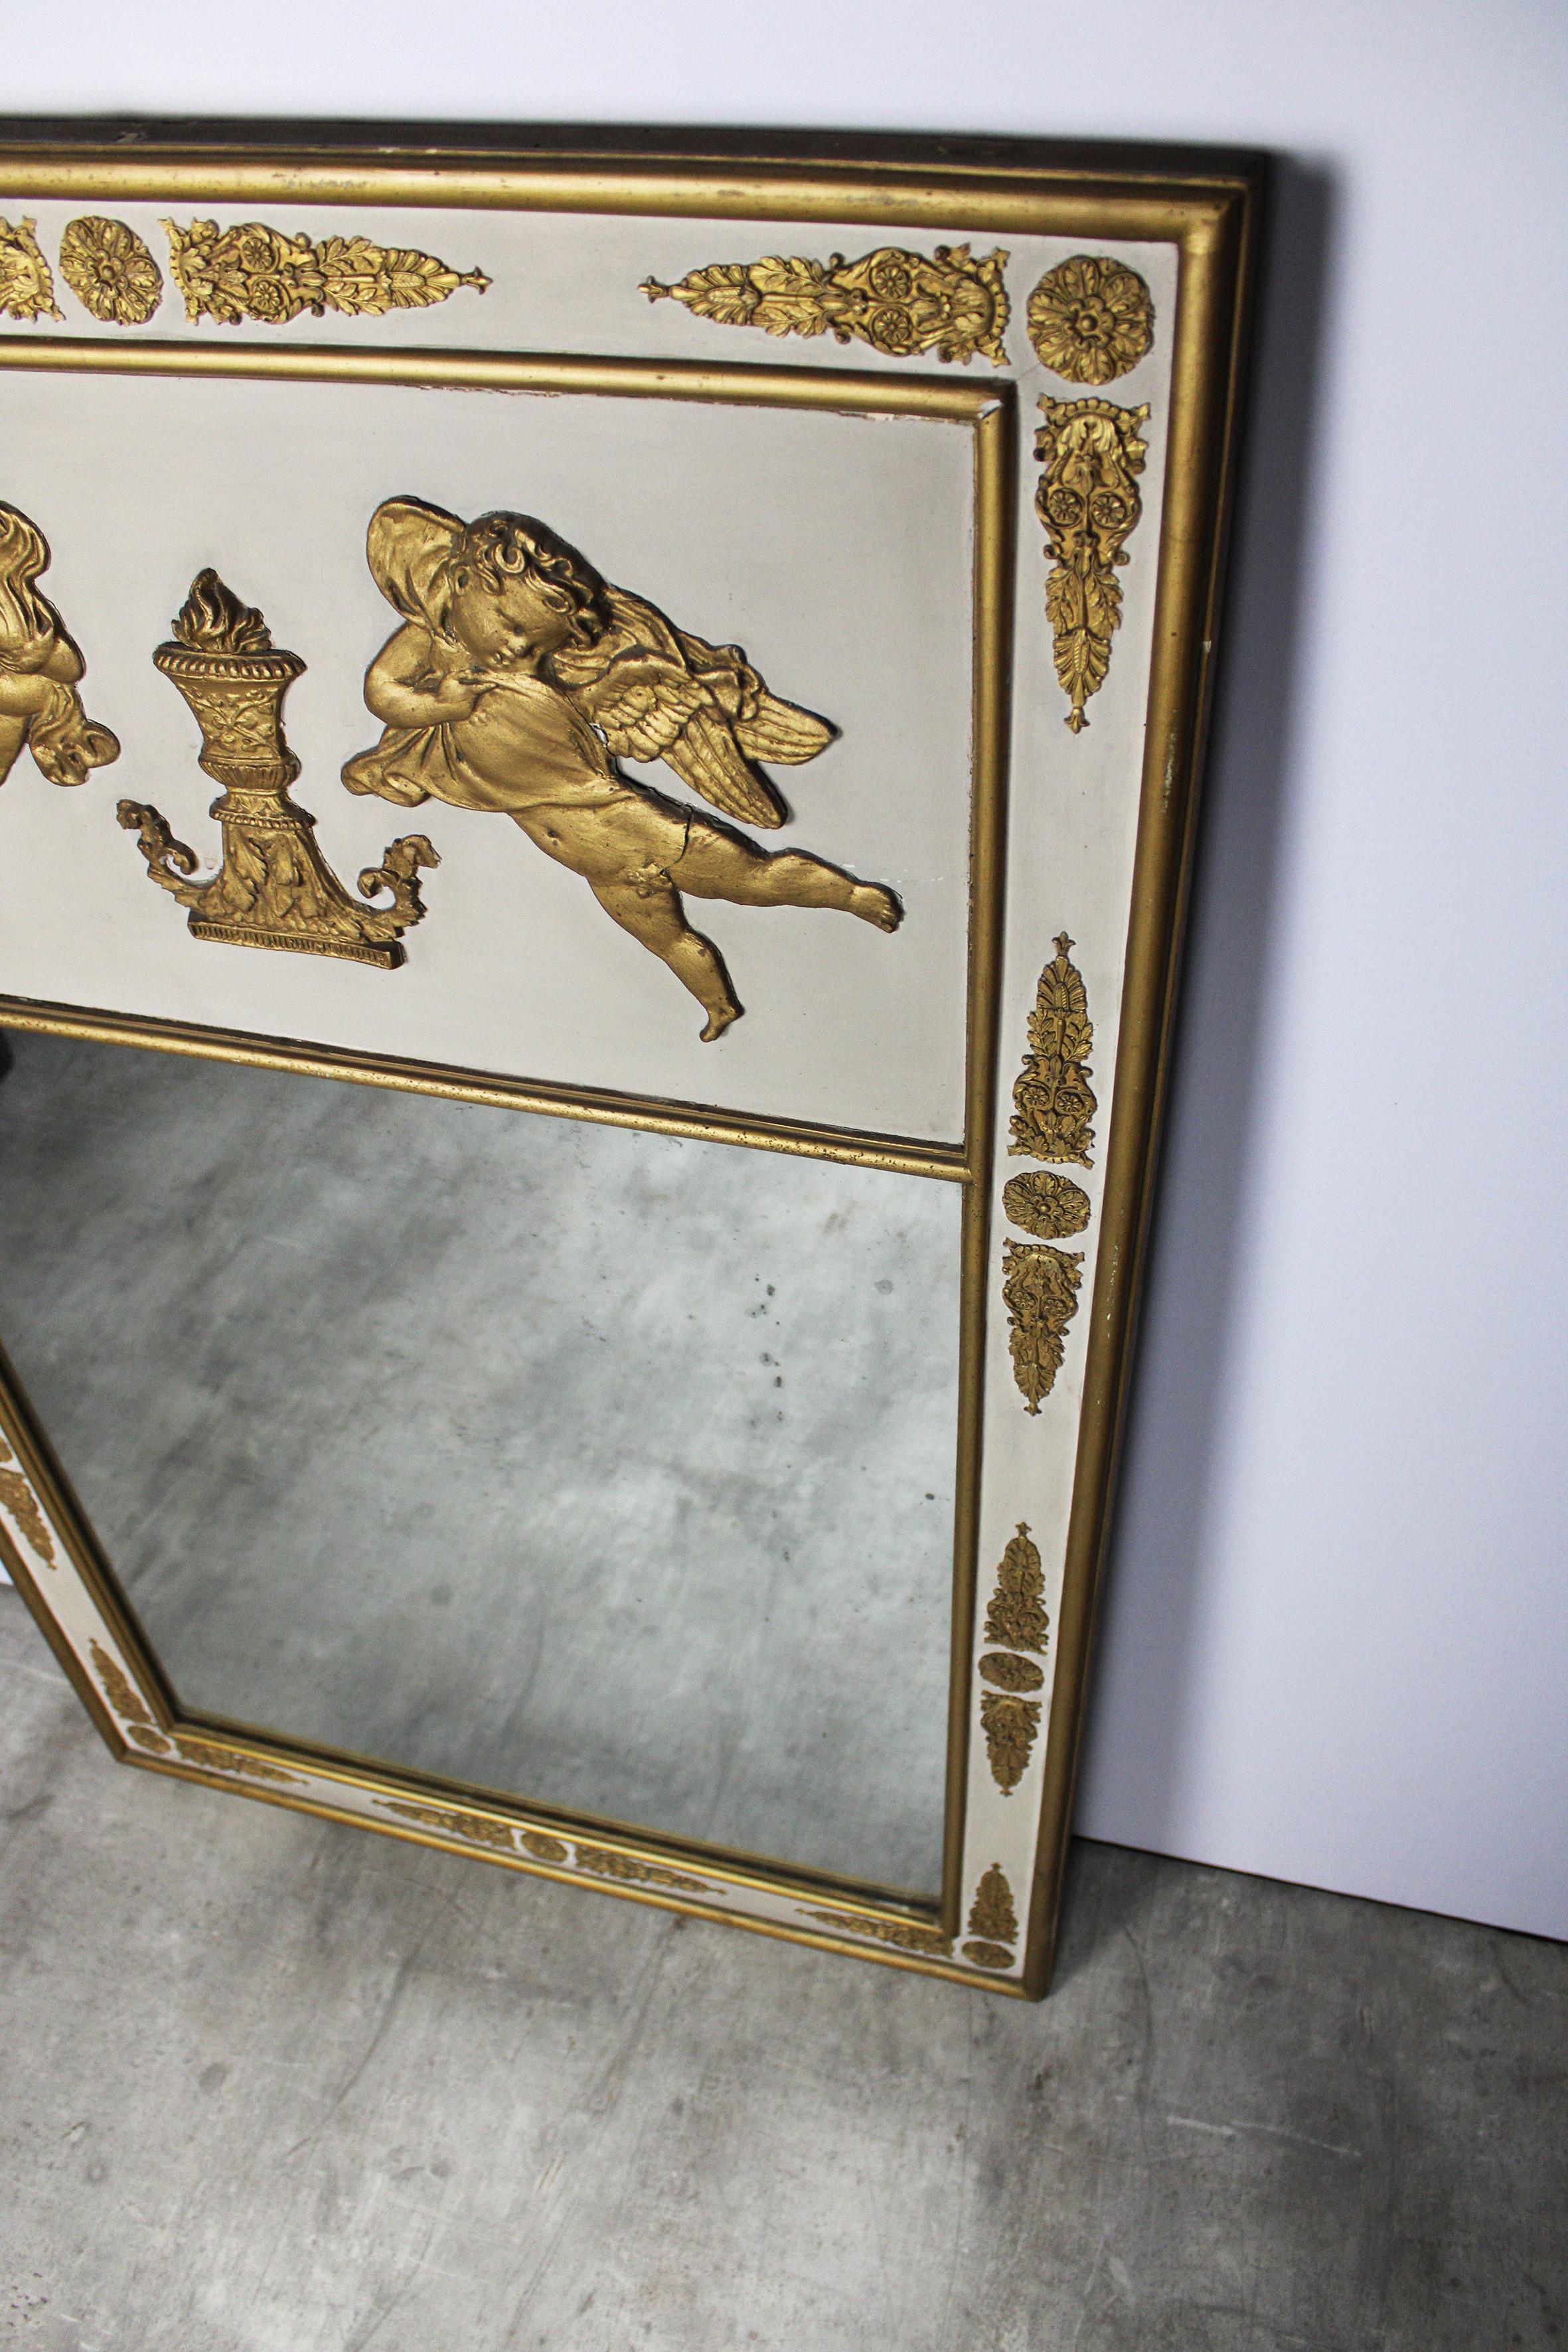 Hand-Crafted Mantel Mirror Gold Leaf White Gilt Wood Renaissance Rococo 19th Century France For Sale